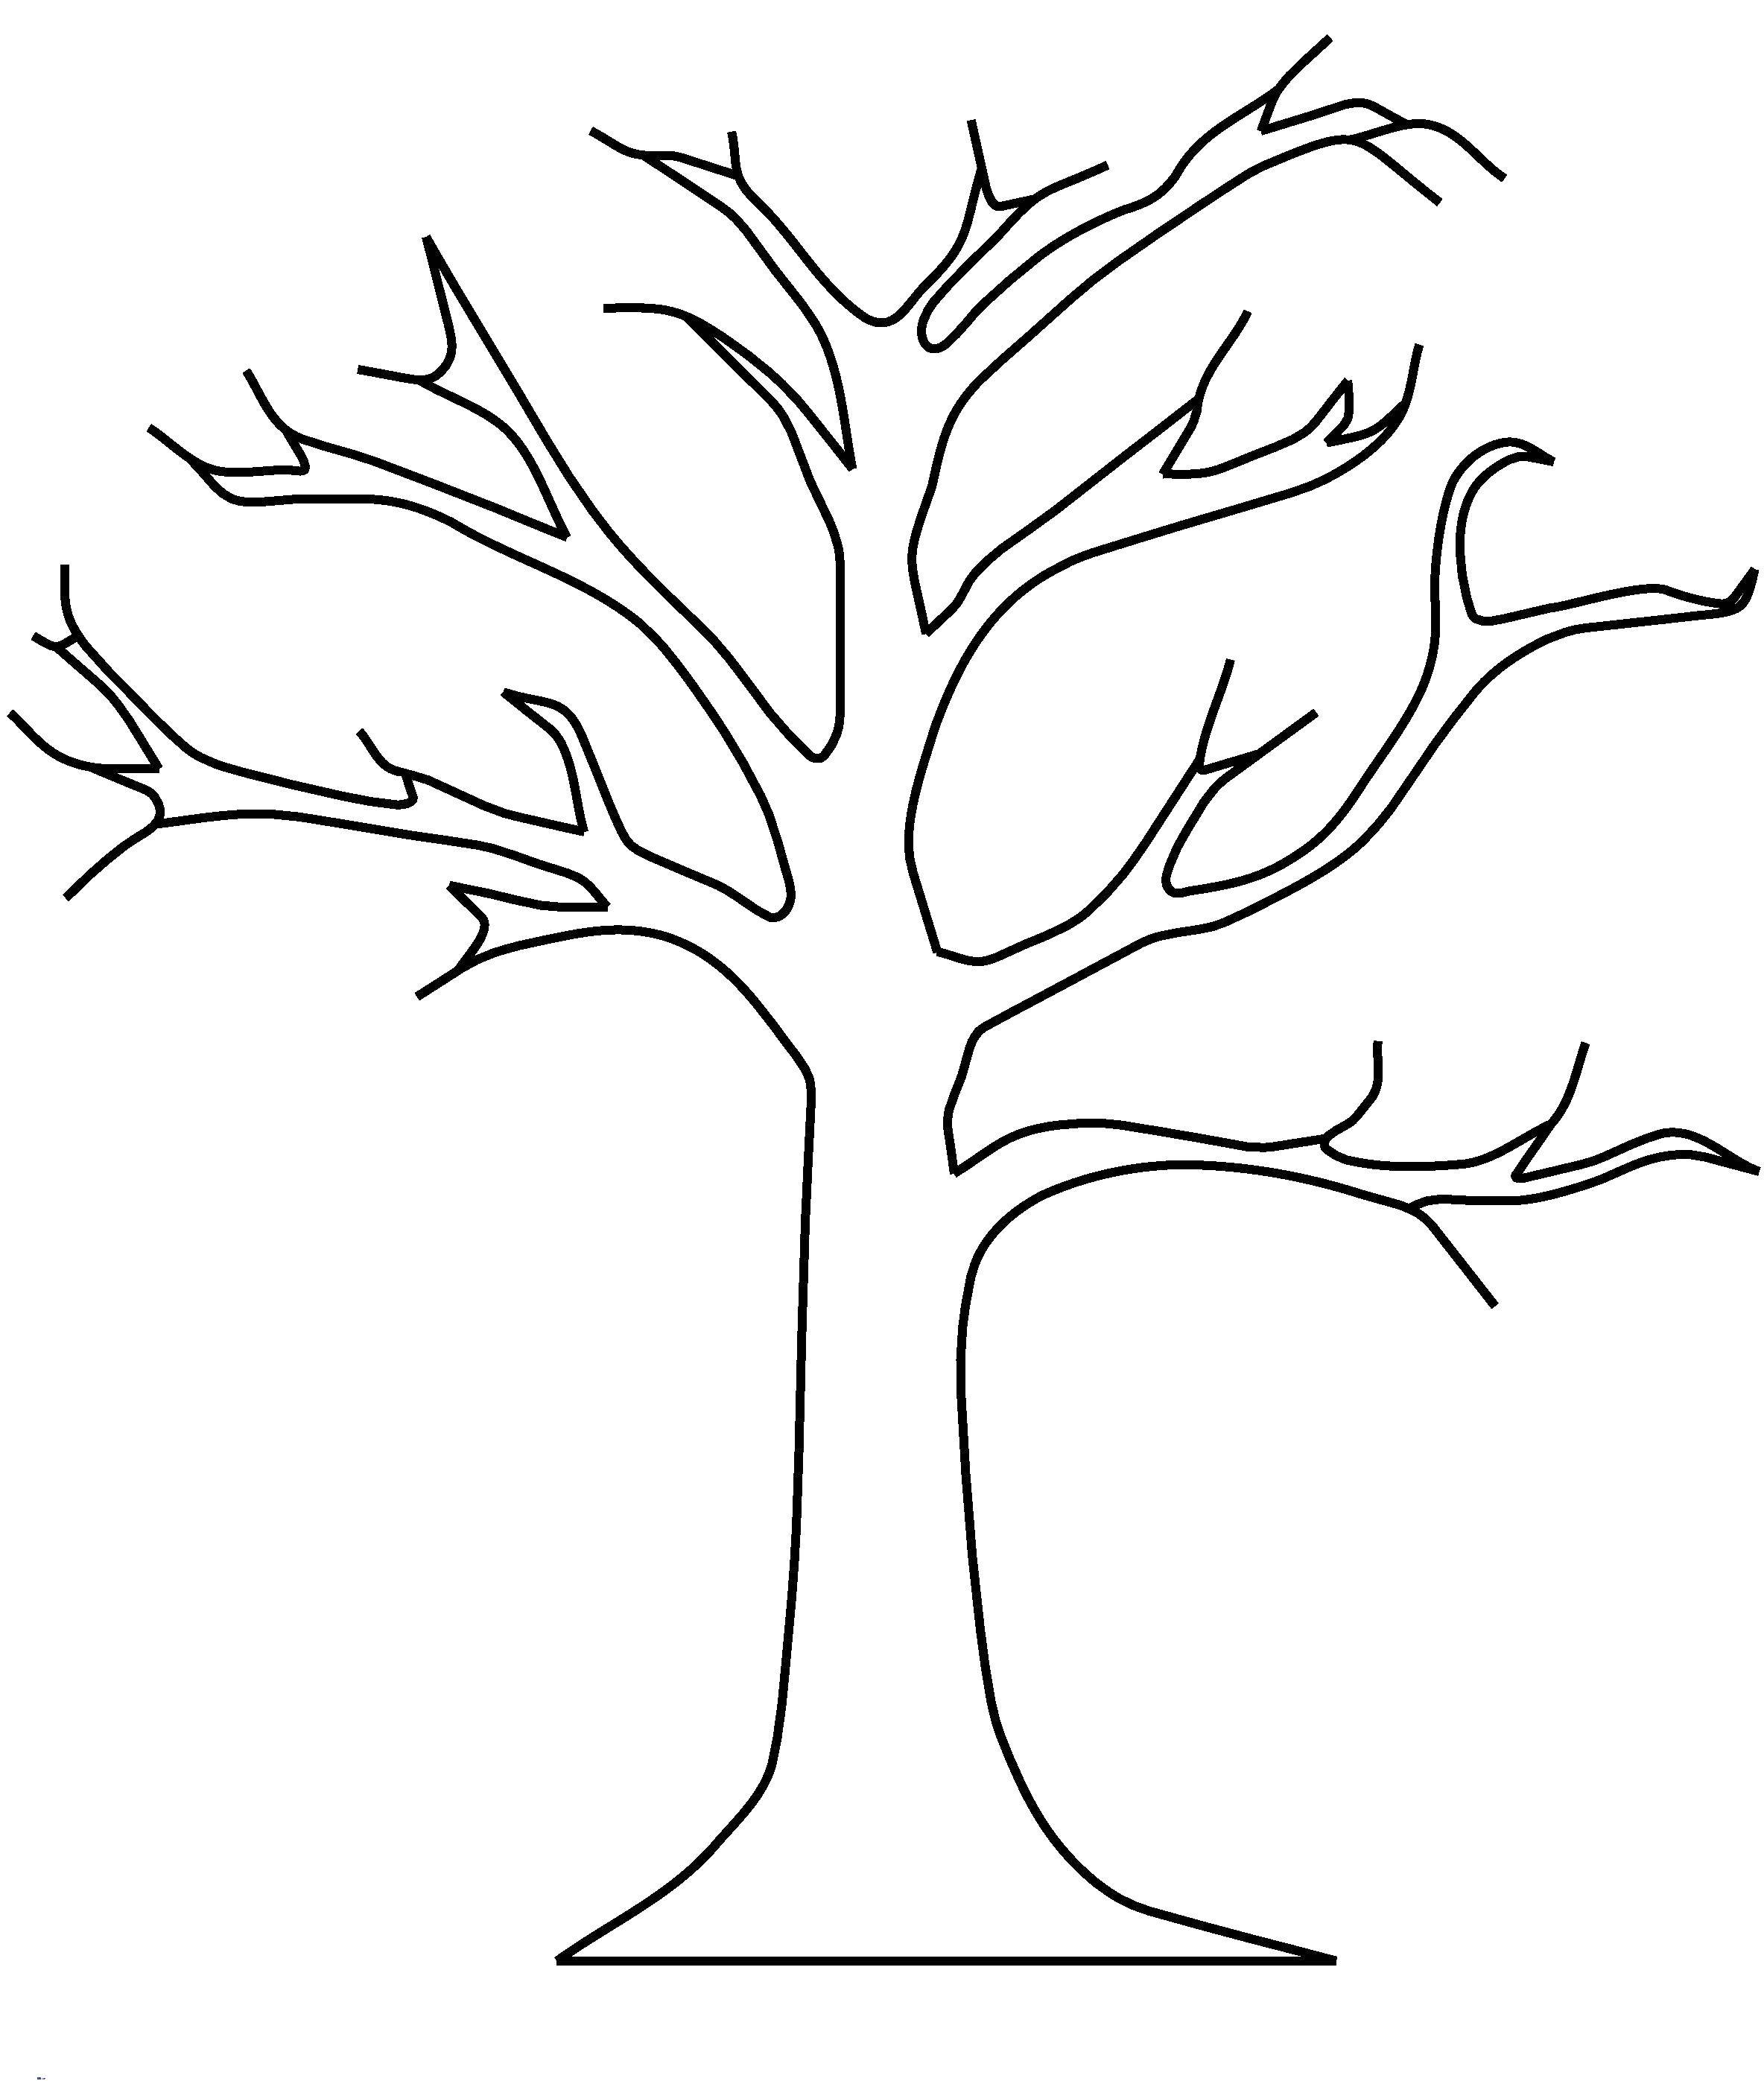 Coloring Tree without leaves. Category The contour of the tree. Tags:  contours, trees, templates.